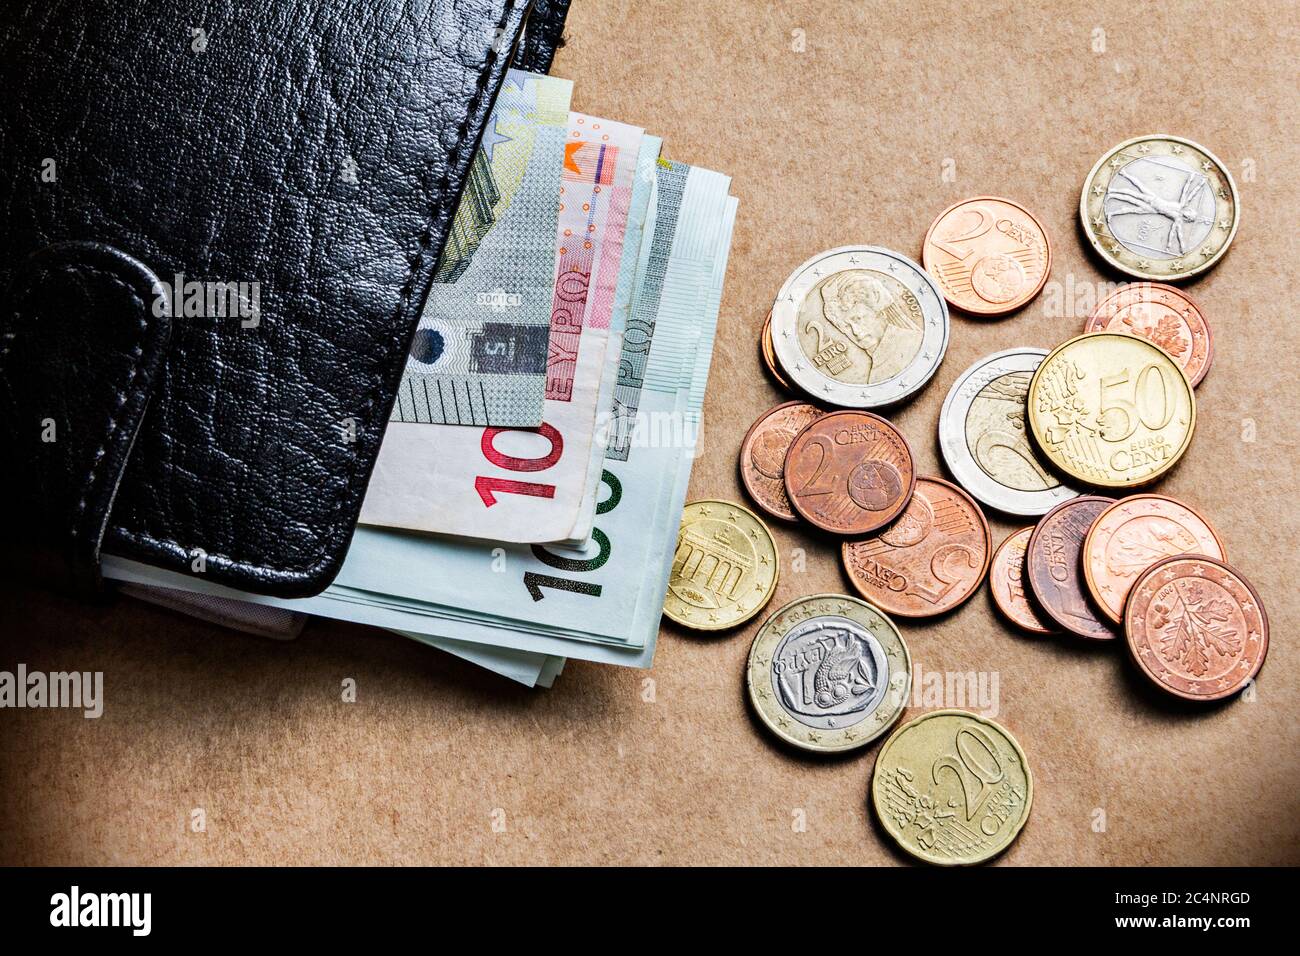 Concept of Personal Finance control with wallet and banknotes coins Stock Photo